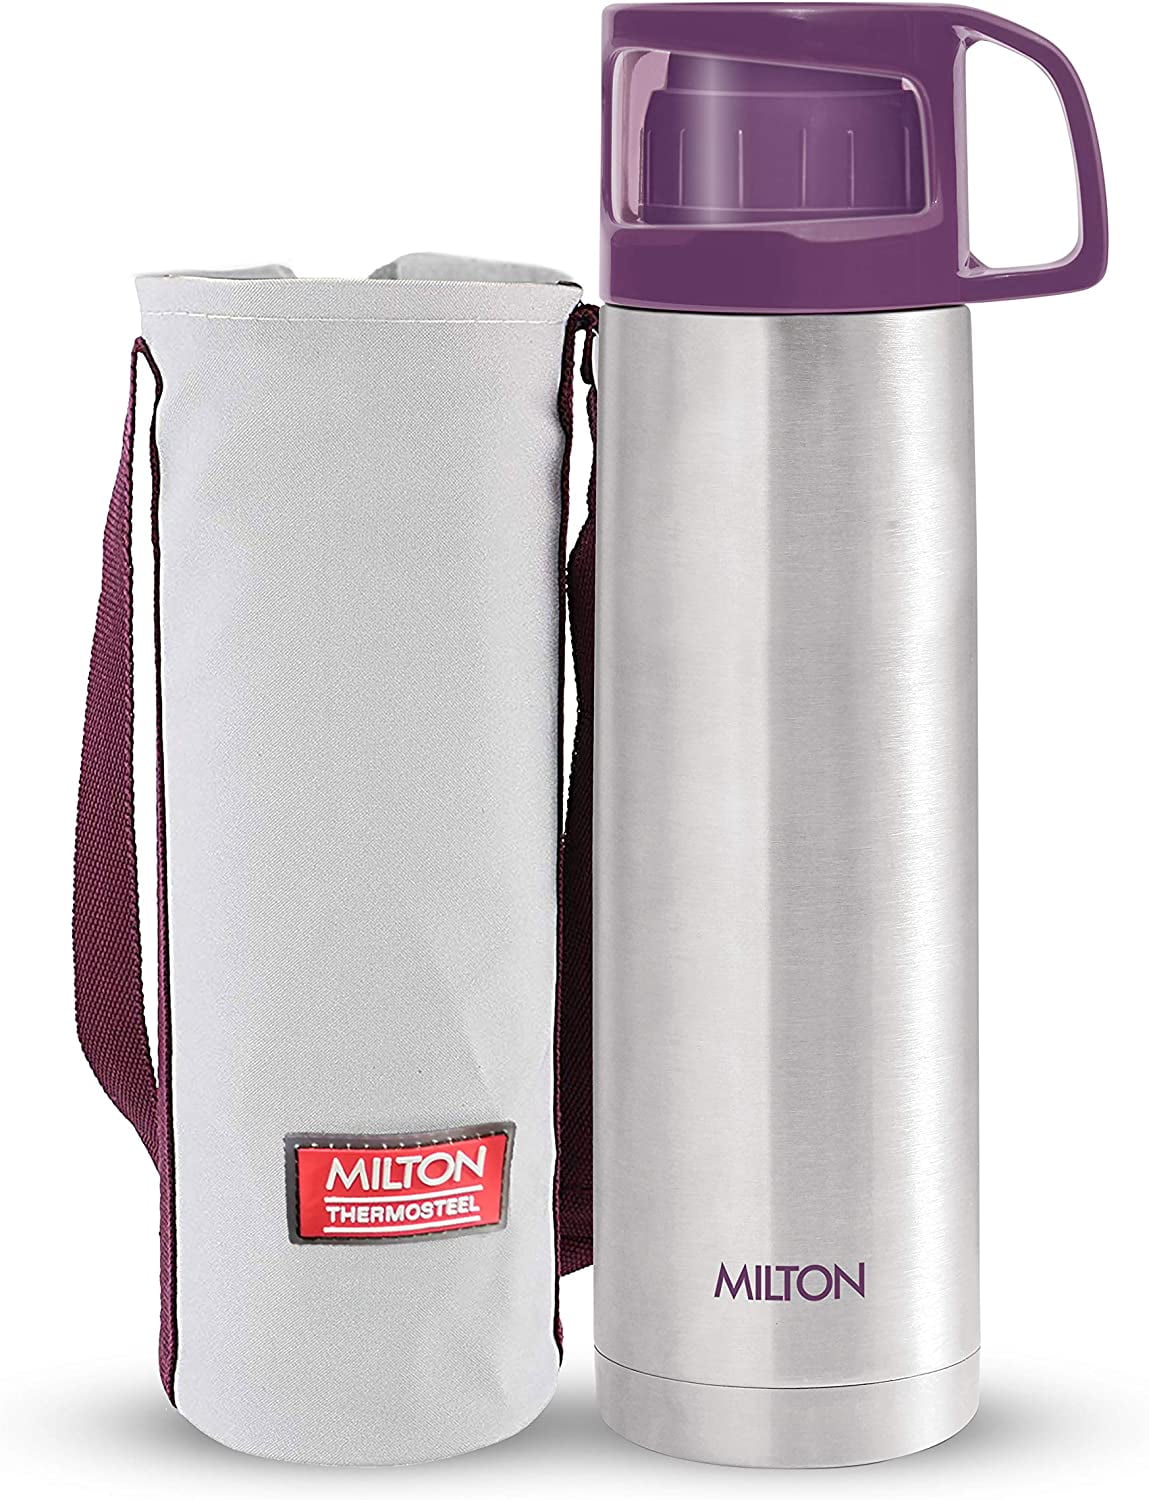 Gigantic 128oz Steel Thermos, 1 gallon, Hot & Cold, Vacuum Instulated,by  TOPIA LTD